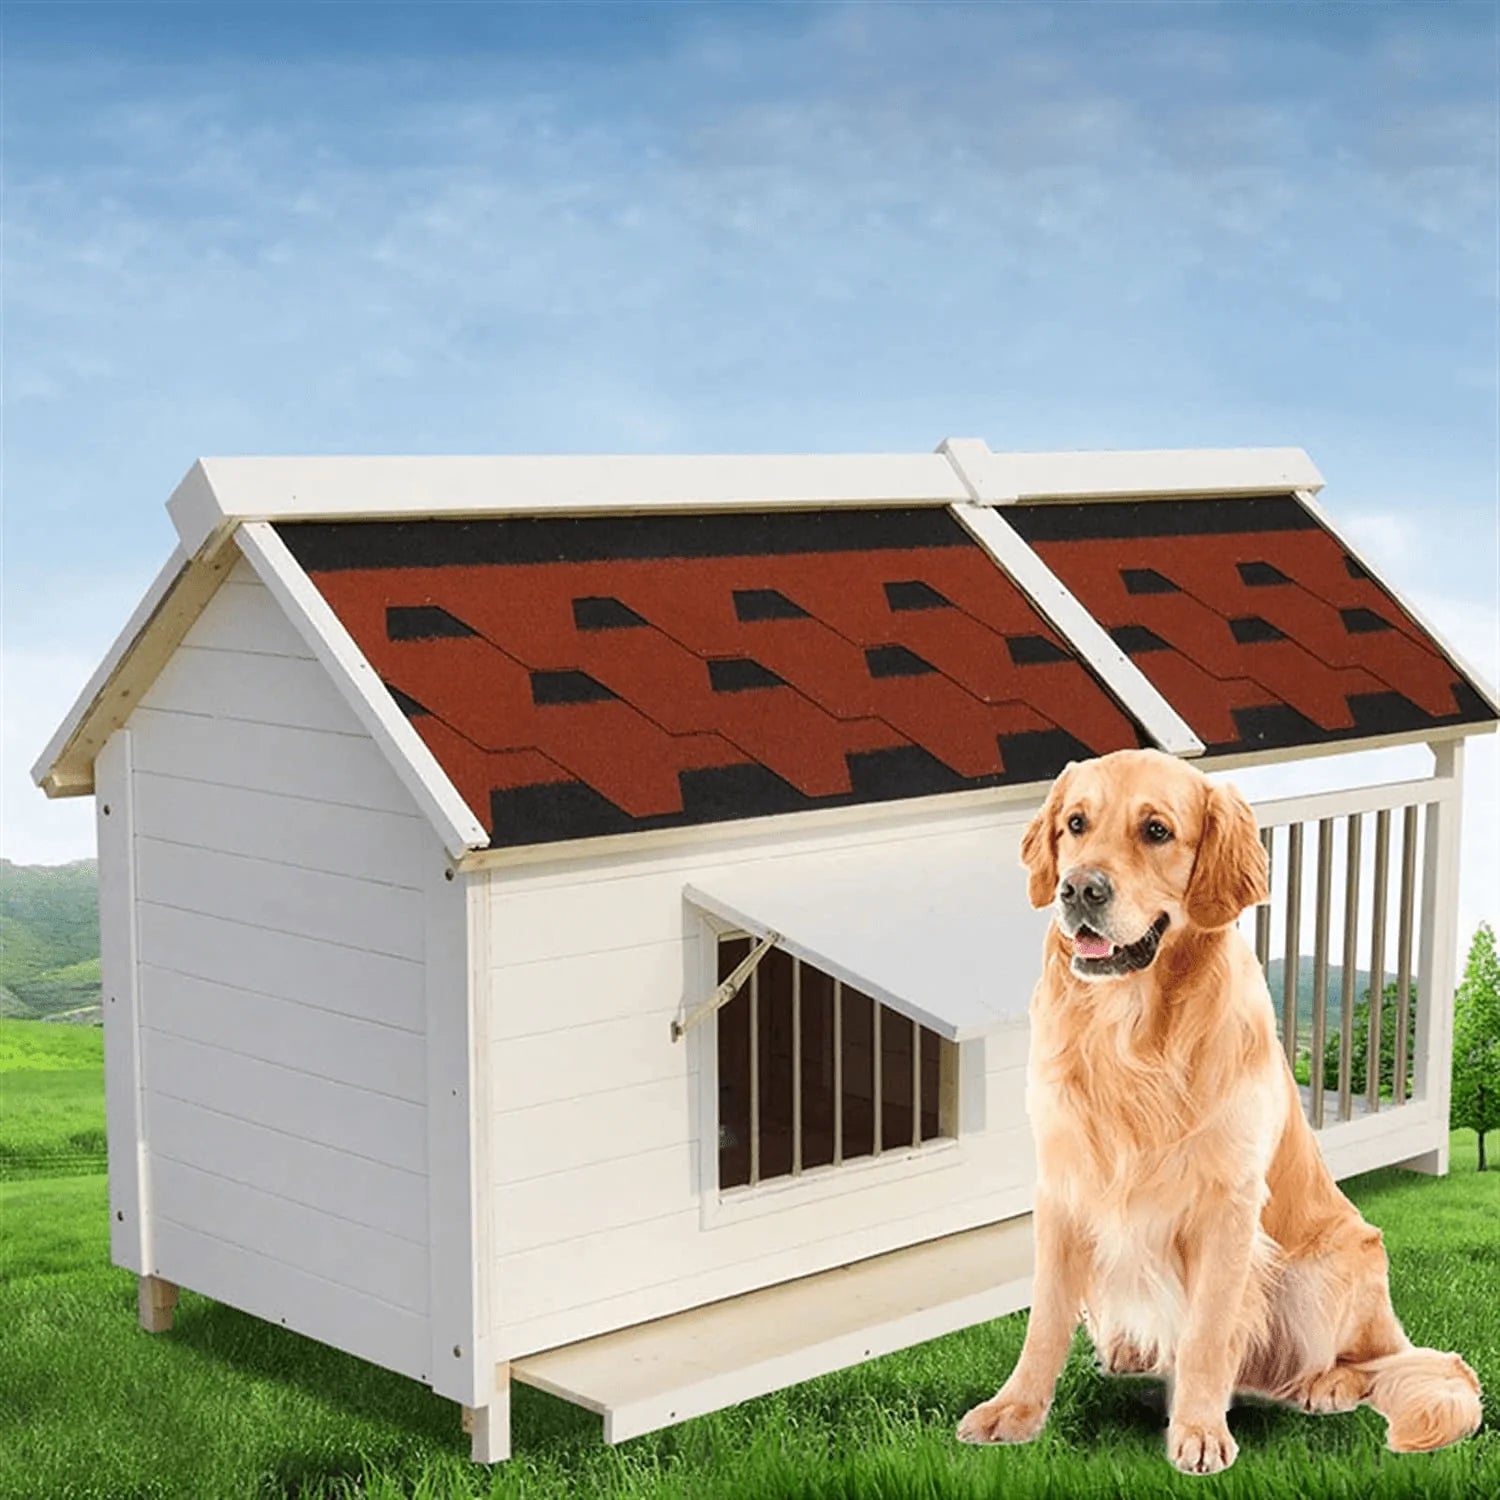 ZYBCRR Wood Dog Houses for Dogs,Weatherproof outside Dog Houses Outdoor Solid Wood Dog House Rainproof and Anticorrosive Medium Wooden Dog Houses